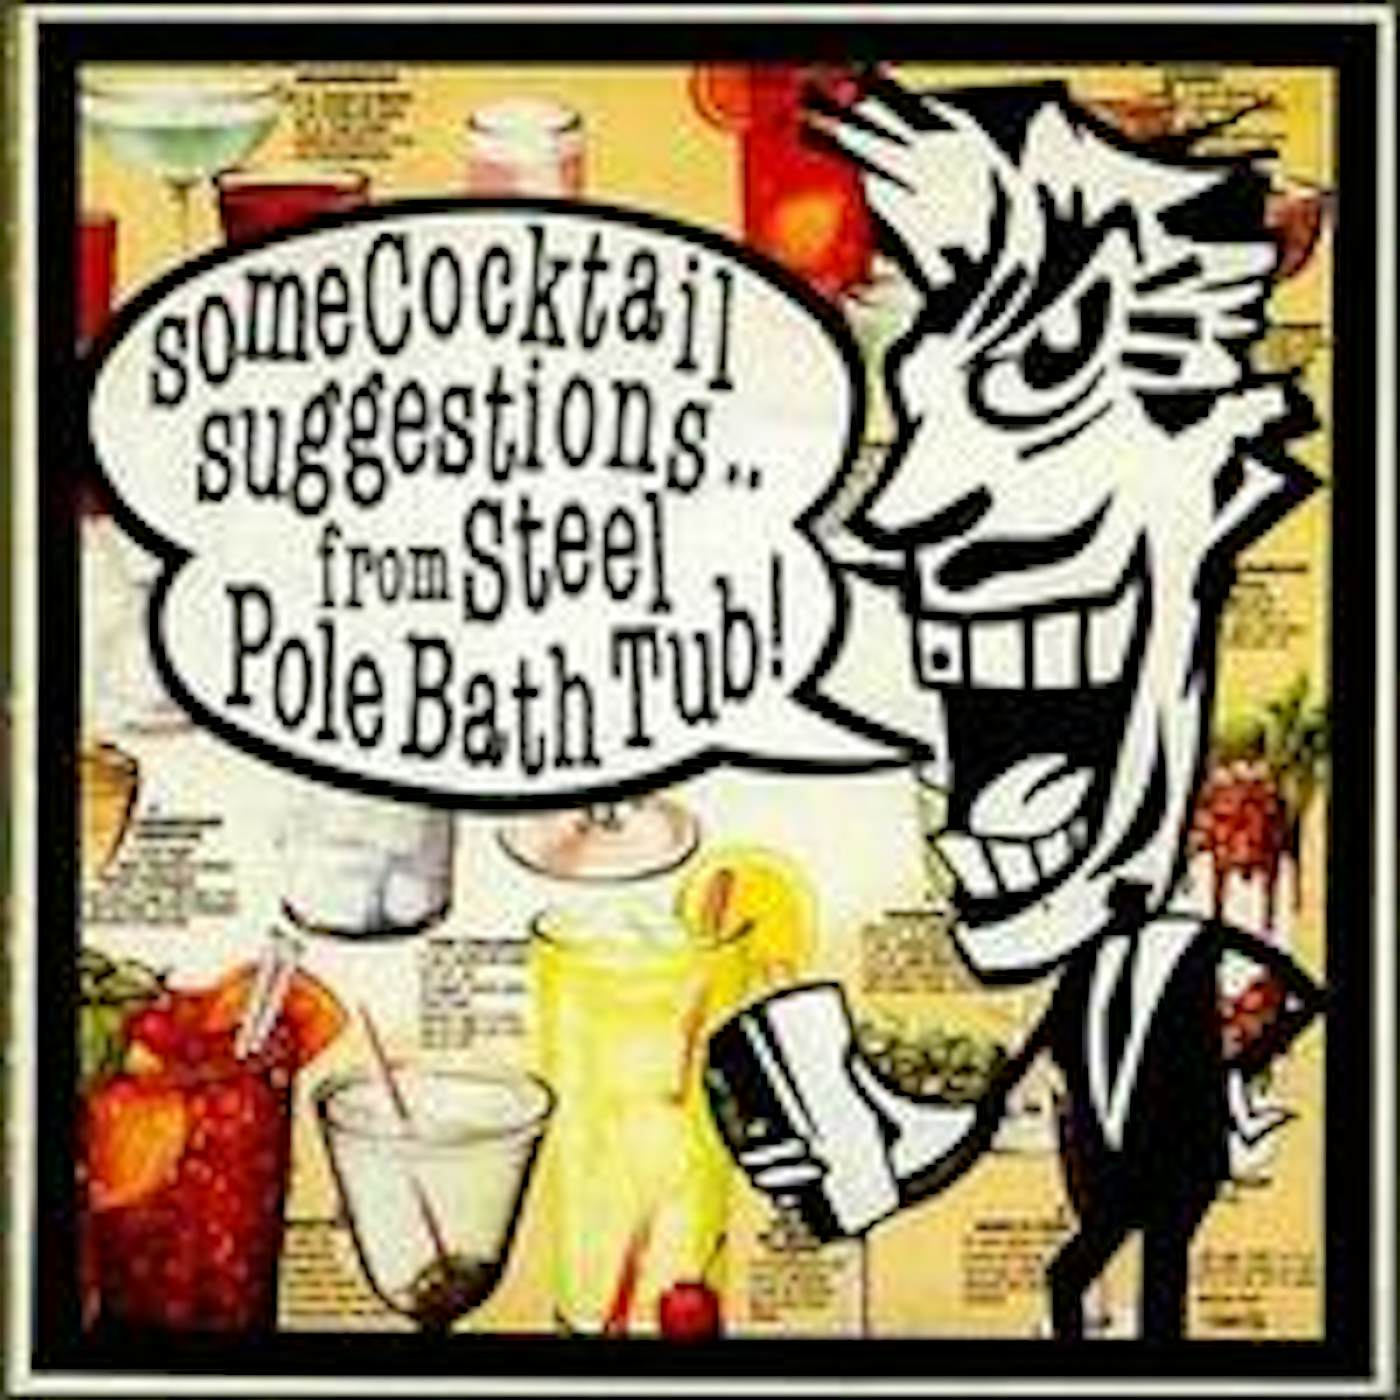 Steel Pole Bath Tub SOME COCKTAIL SUGGESTIONS CD